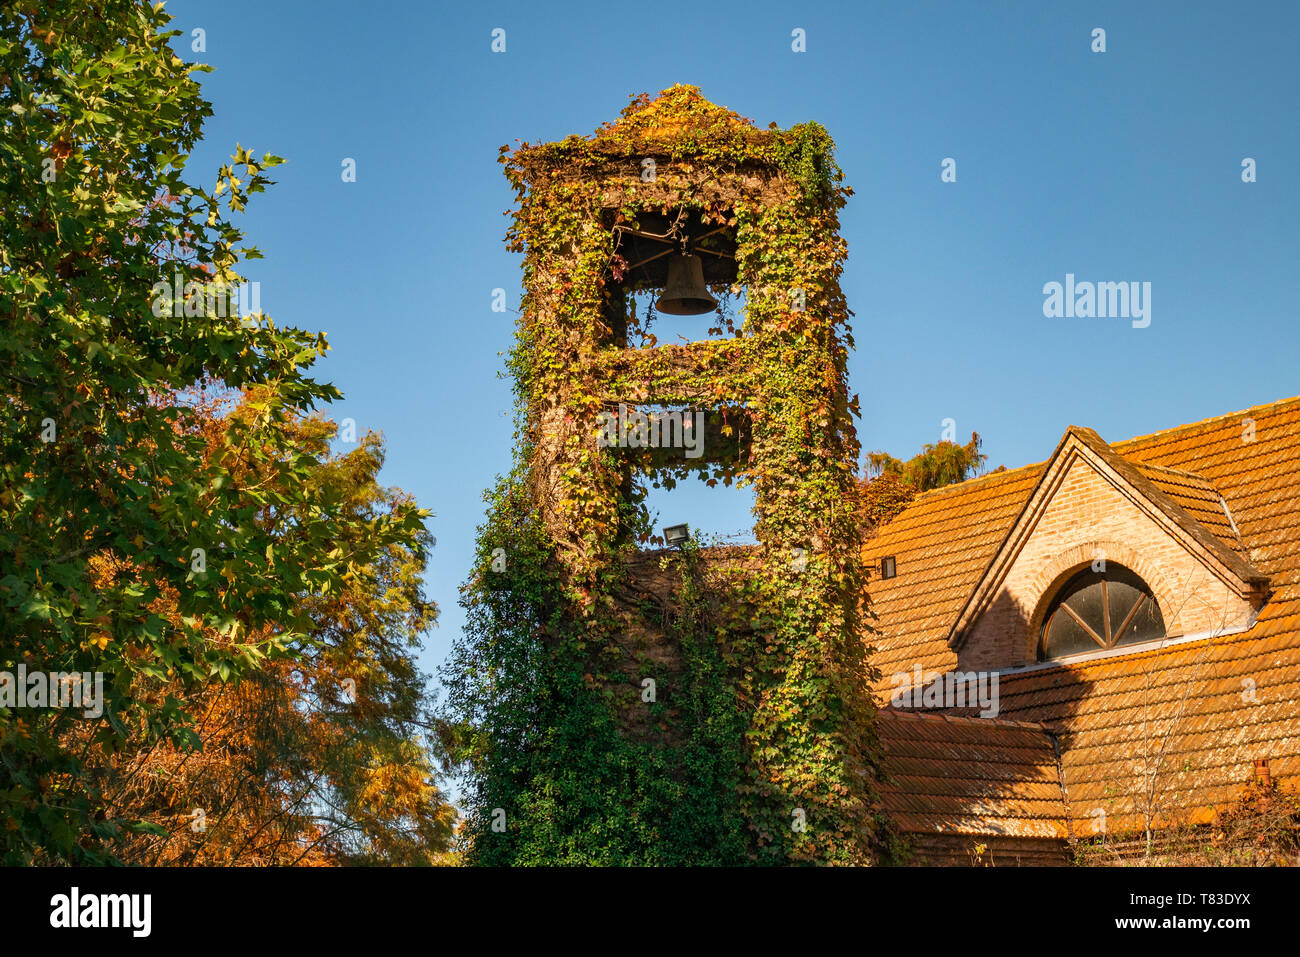 Yellows, reds and ochres in a bell tower in a sunny autumn park. The colors and luminosity of autumn take over this rural image in the suburbs. Stock Photo